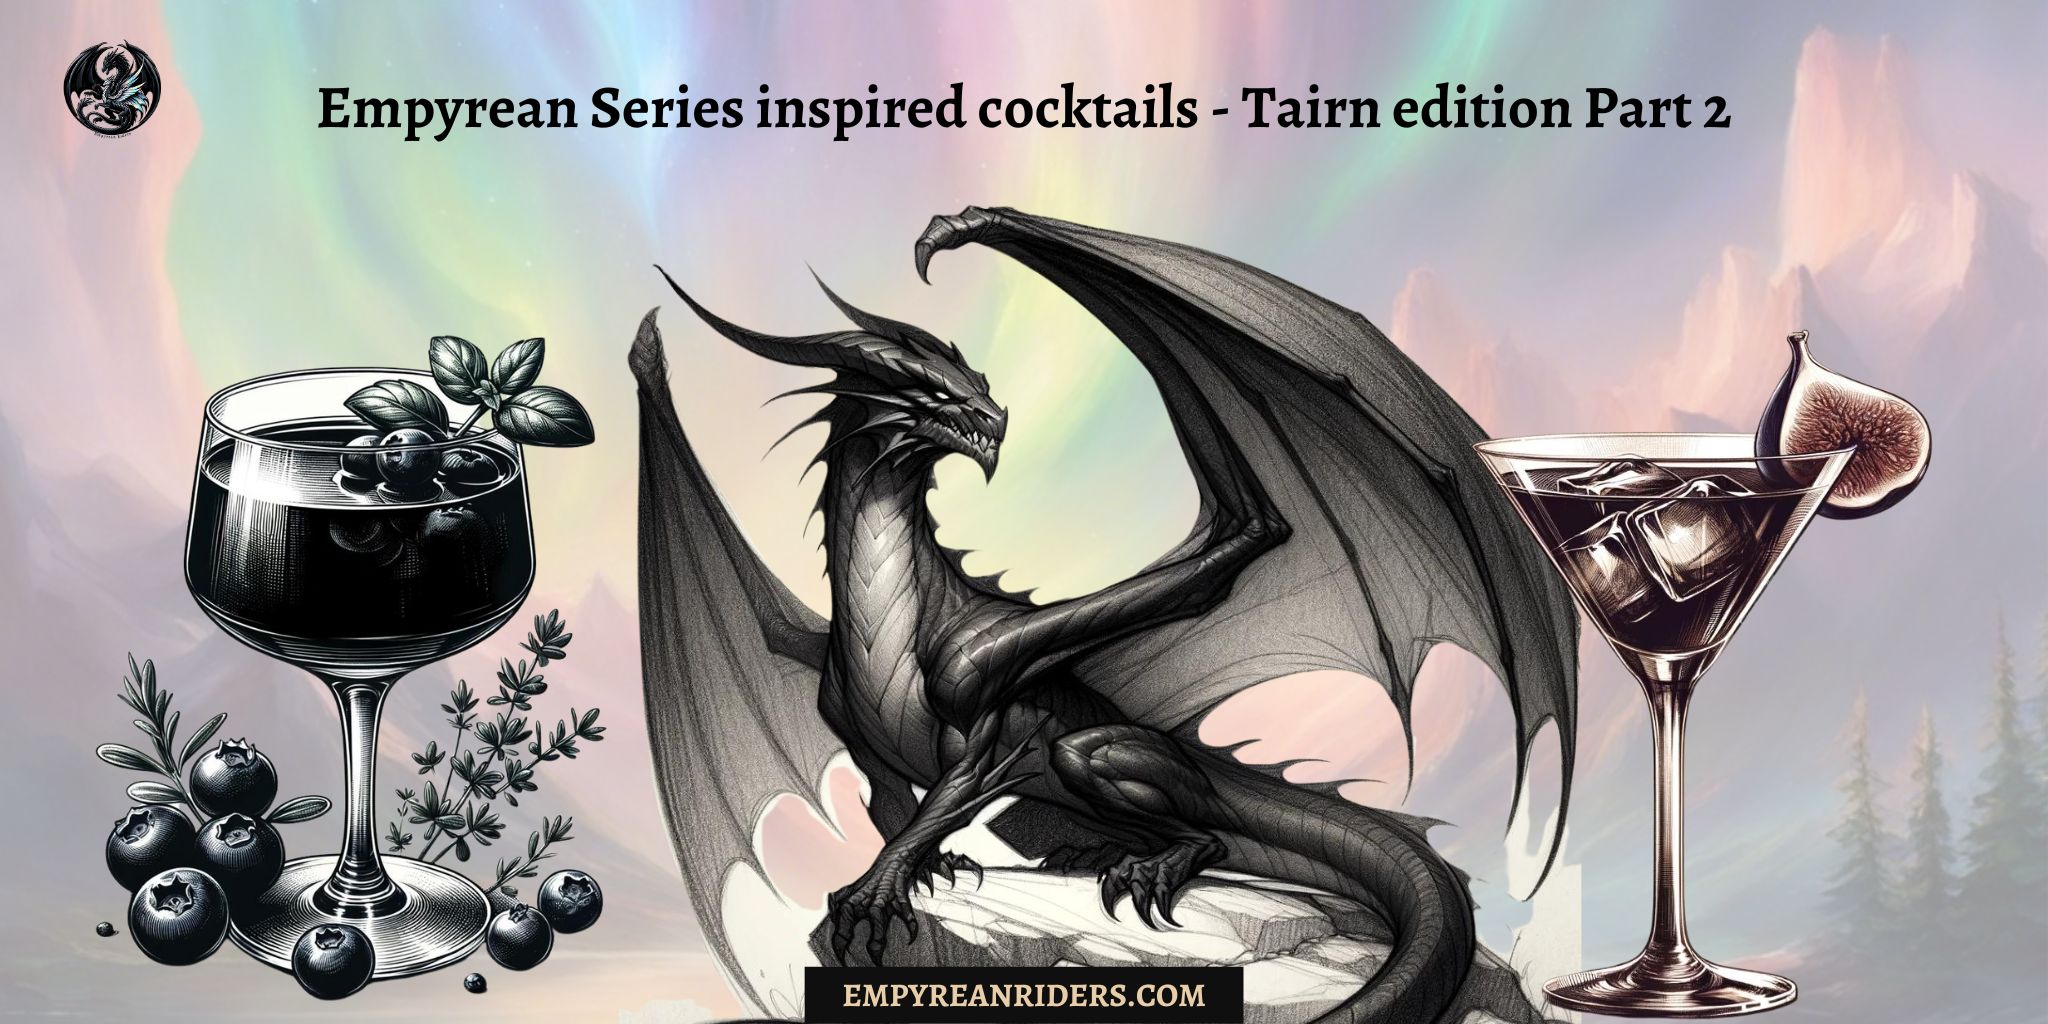 Empyrean Series inspired cocktails – Tairn edition Part 2